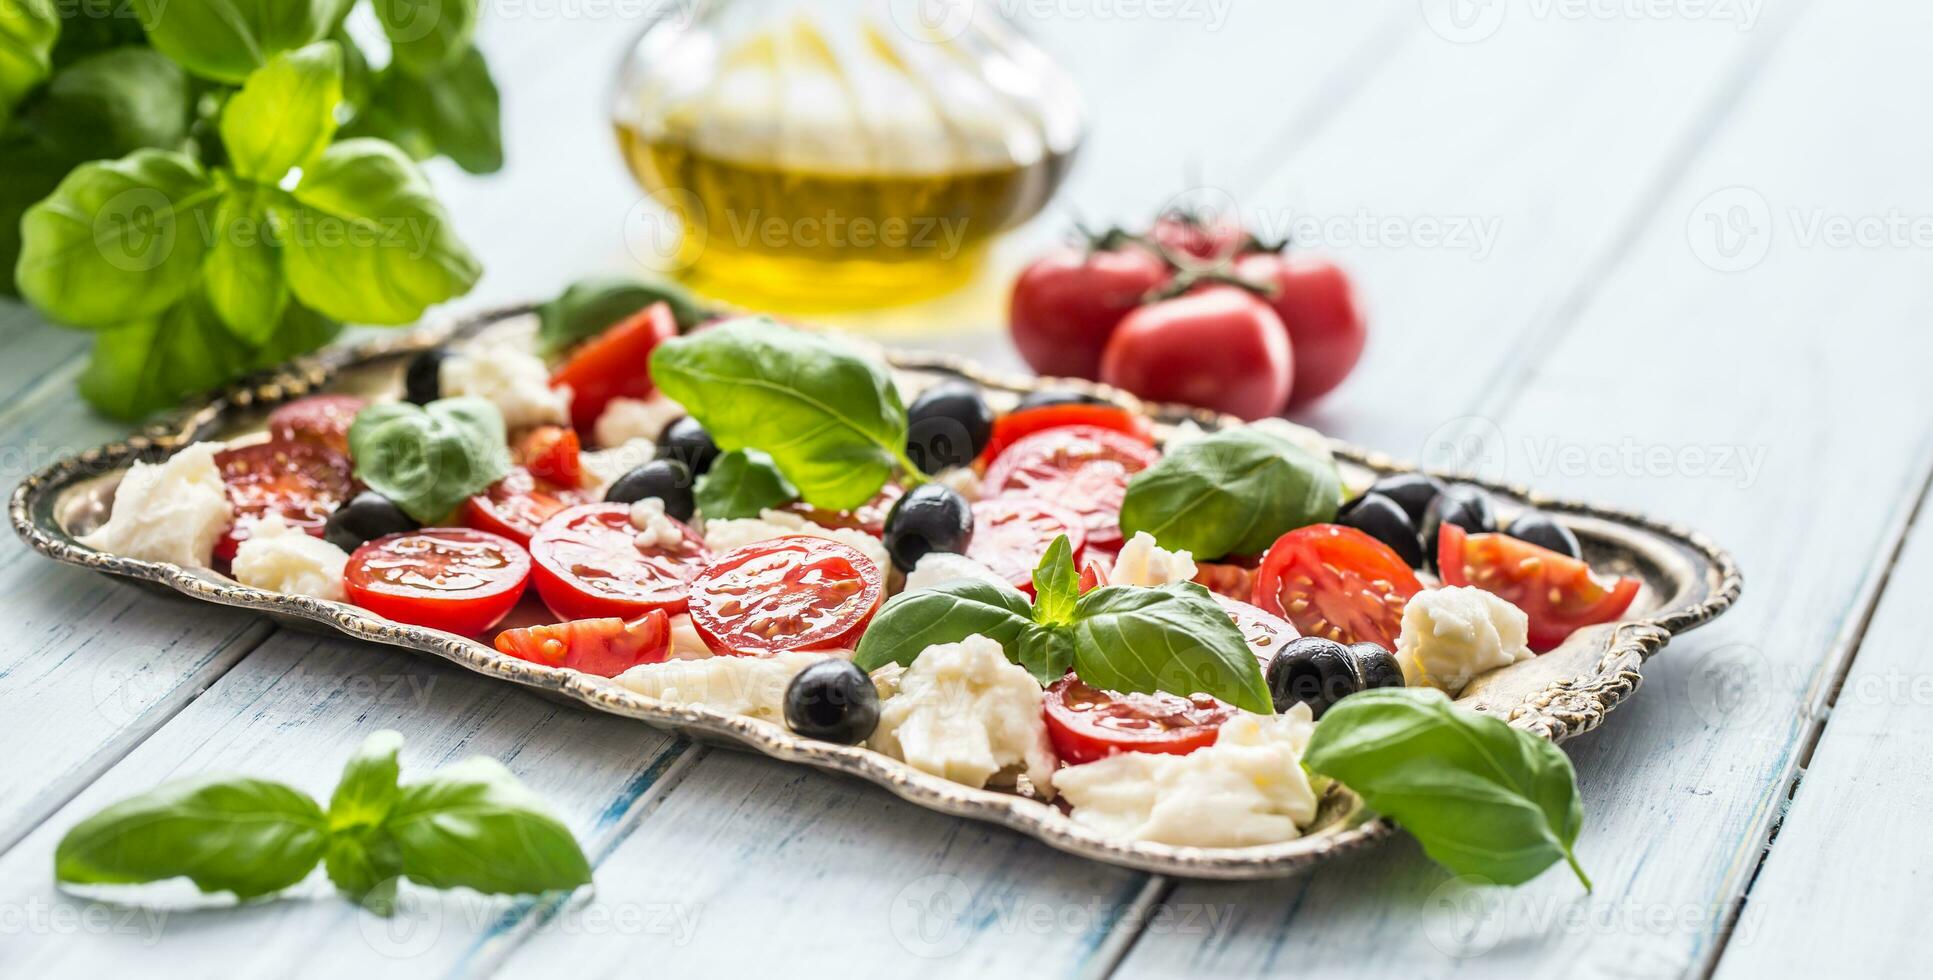 Caprese salad with mozzarella cheese ripe tomatoes olives and basil leaves. Italian or mediterranean healthy meal photo